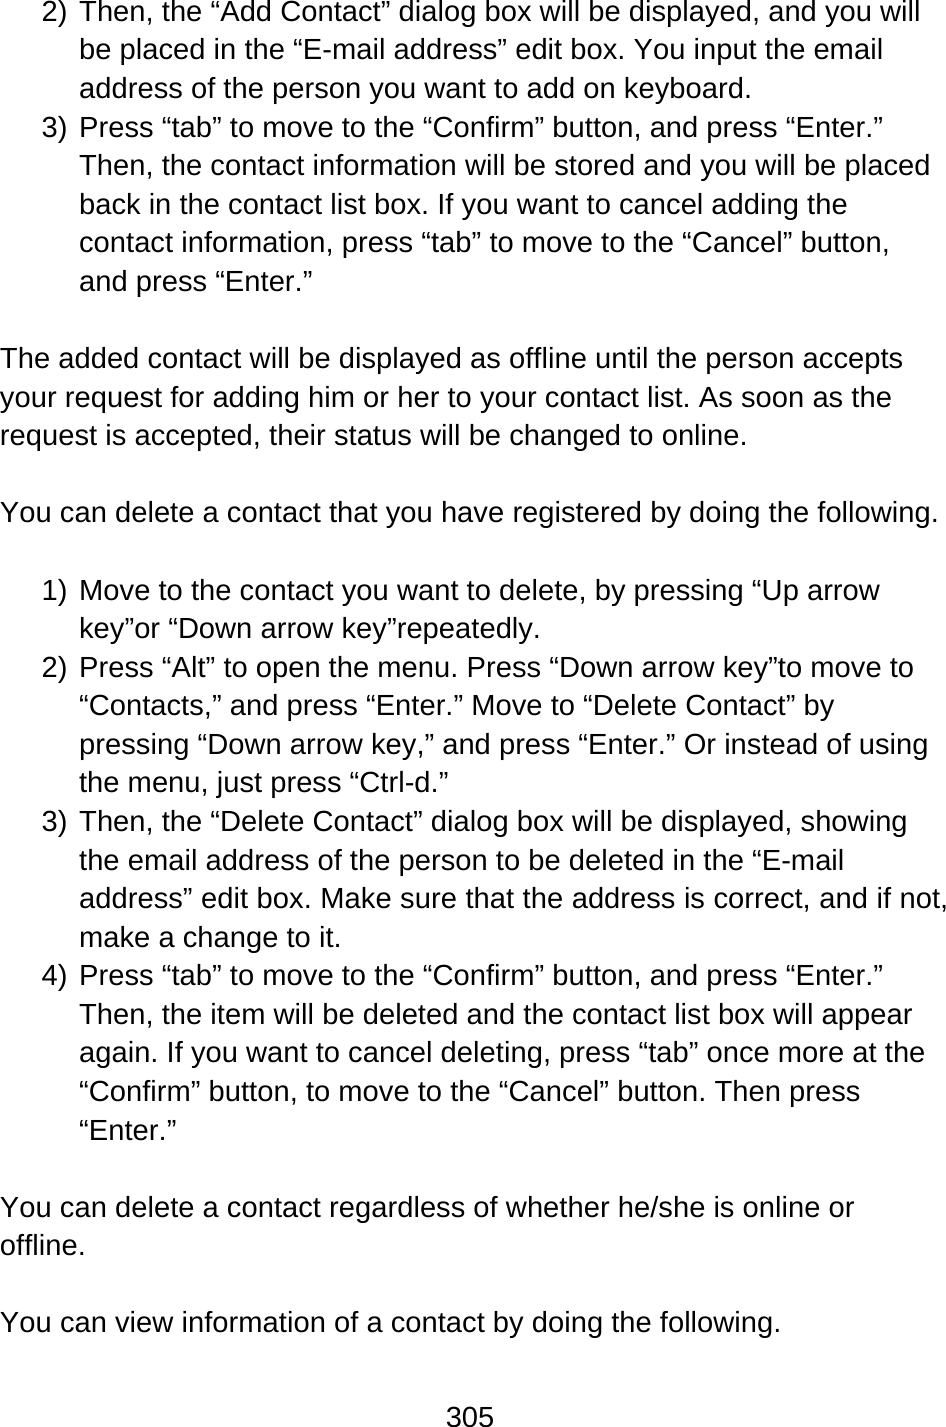 305  2) Then, the “Add Contact” dialog box will be displayed, and you will be placed in the “E-mail address” edit box. You input the email address of the person you want to add on keyboard. 3) Press “tab” to move to the “Confirm” button, and press “Enter.” Then, the contact information will be stored and you will be placed back in the contact list box. If you want to cancel adding the contact information, press “tab” to move to the “Cancel” button, and press “Enter.”  The added contact will be displayed as offline until the person accepts your request for adding him or her to your contact list. As soon as the request is accepted, their status will be changed to online.  You can delete a contact that you have registered by doing the following.  1) Move to the contact you want to delete, by pressing “Up arrow key”or “Down arrow key”repeatedly. 2) Press “Alt” to open the menu. Press “Down arrow key”to move to “Contacts,” and press “Enter.” Move to “Delete Contact” by pressing “Down arrow key,” and press “Enter.” Or instead of using the menu, just press “Ctrl-d.” 3) Then, the “Delete Contact” dialog box will be displayed, showing the email address of the person to be deleted in the “E-mail address” edit box. Make sure that the address is correct, and if not, make a change to it. 4) Press “tab” to move to the “Confirm” button, and press “Enter.” Then, the item will be deleted and the contact list box will appear again. If you want to cancel deleting, press “tab” once more at the “Confirm” button, to move to the “Cancel” button. Then press “Enter.”  You can delete a contact regardless of whether he/she is online or offline.  You can view information of a contact by doing the following.  